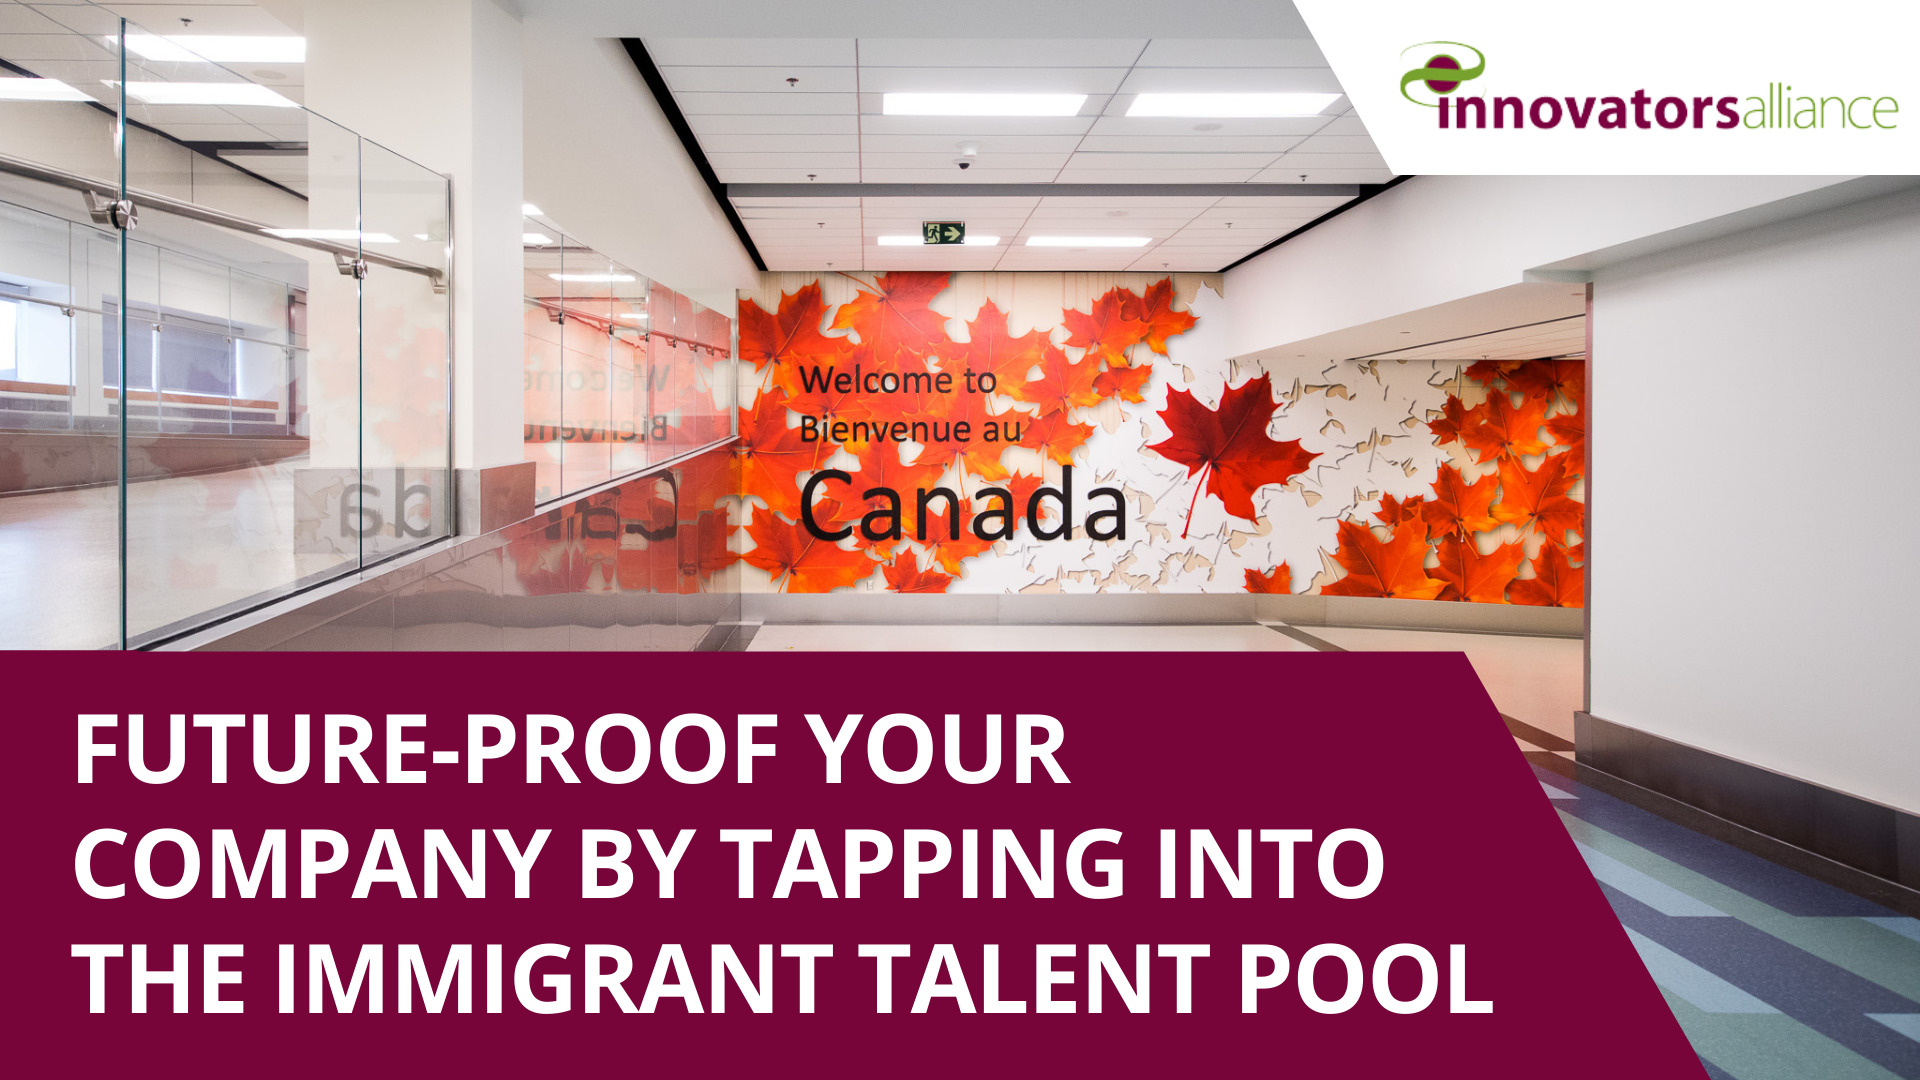 Future-proof Your Company by Tapping into the Immigrant Talent Pool